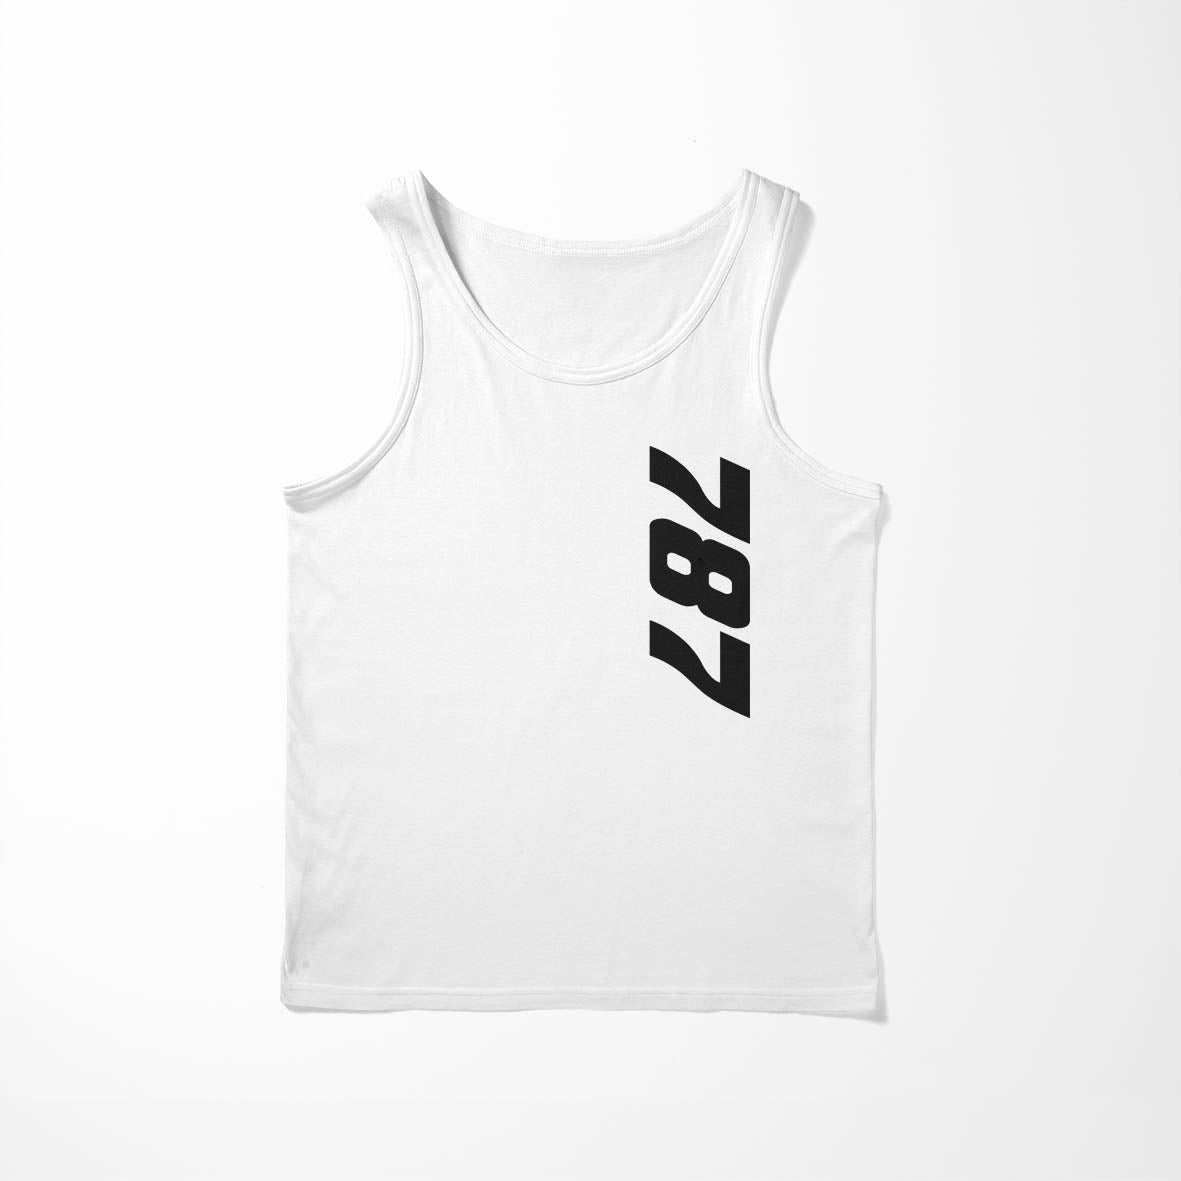 787 Side Text Designed Tank Tops